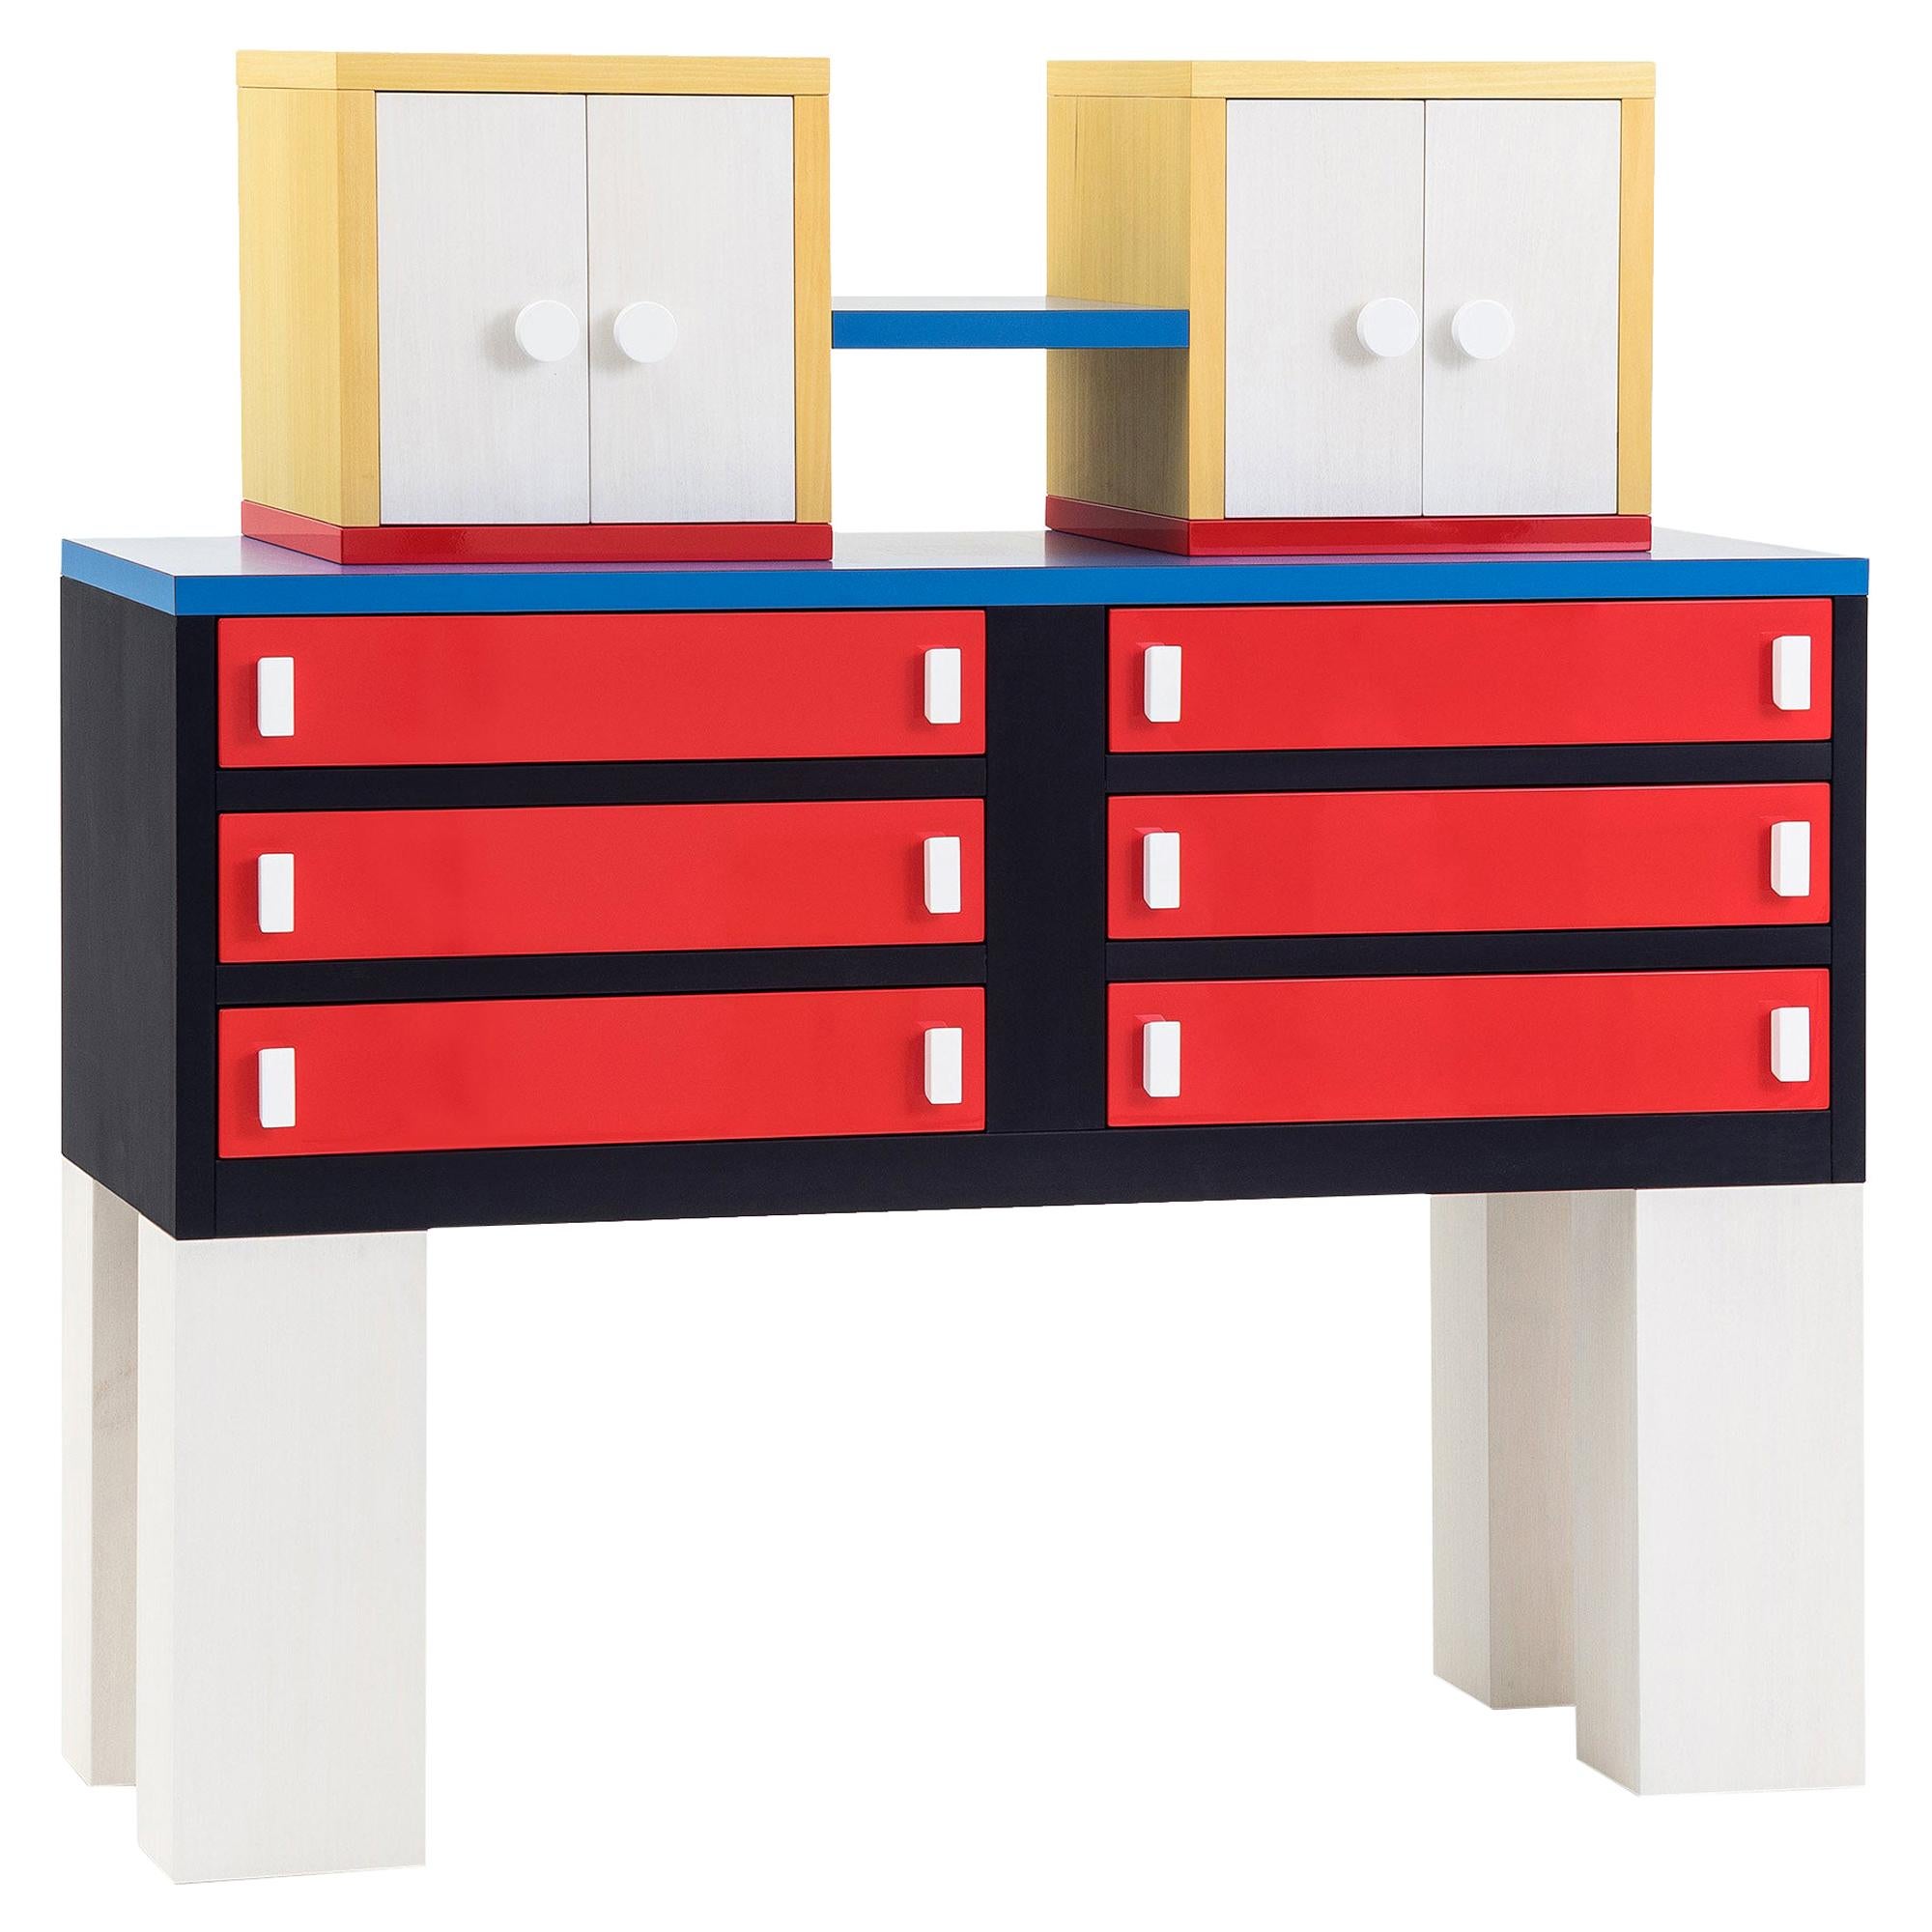 GRANITO Chest of Drawers by Nathalie du Pasquier for Post Design Collect/Memphis For Sale